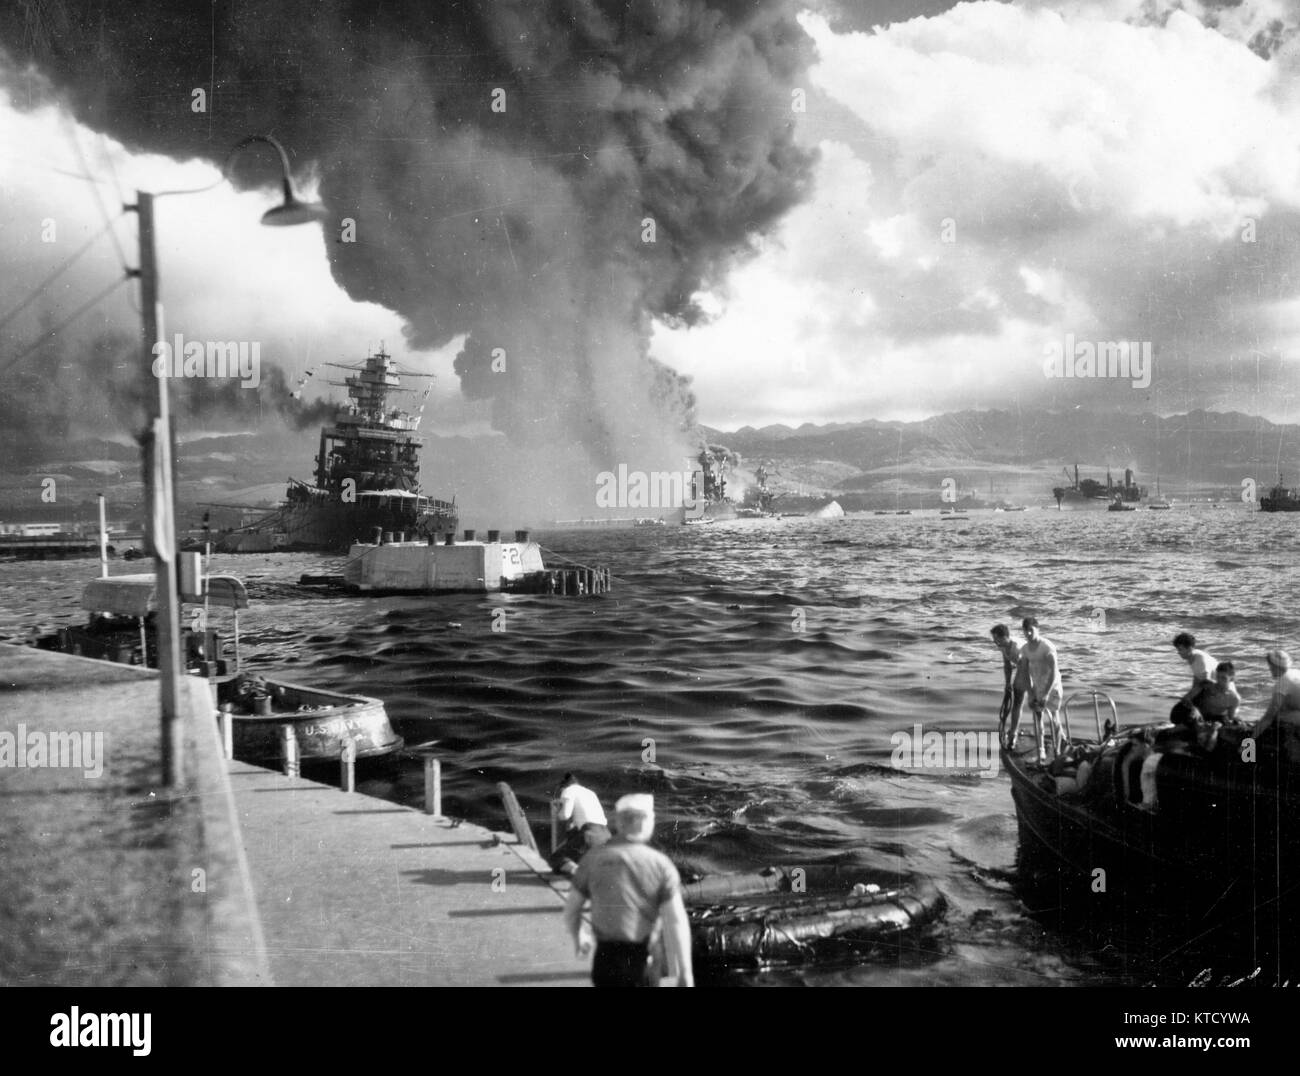 Pearl Harbor Attack, 7 December 1941 - View looking down Battleship Row from Ford Island Naval Air Station, shortly after the Japanese torpedo plane attack. USS California (BB-44) is at left, listing to port after receiving two torpedo hits. In the center are USS Maryland (BB-46) with the capsized USS Oklahoma (BB-37) alongside. USS Neosho (AO-23) is at right, backing clear of the area. Most smoke is from USS Arizona (BB-39). Stock Photo